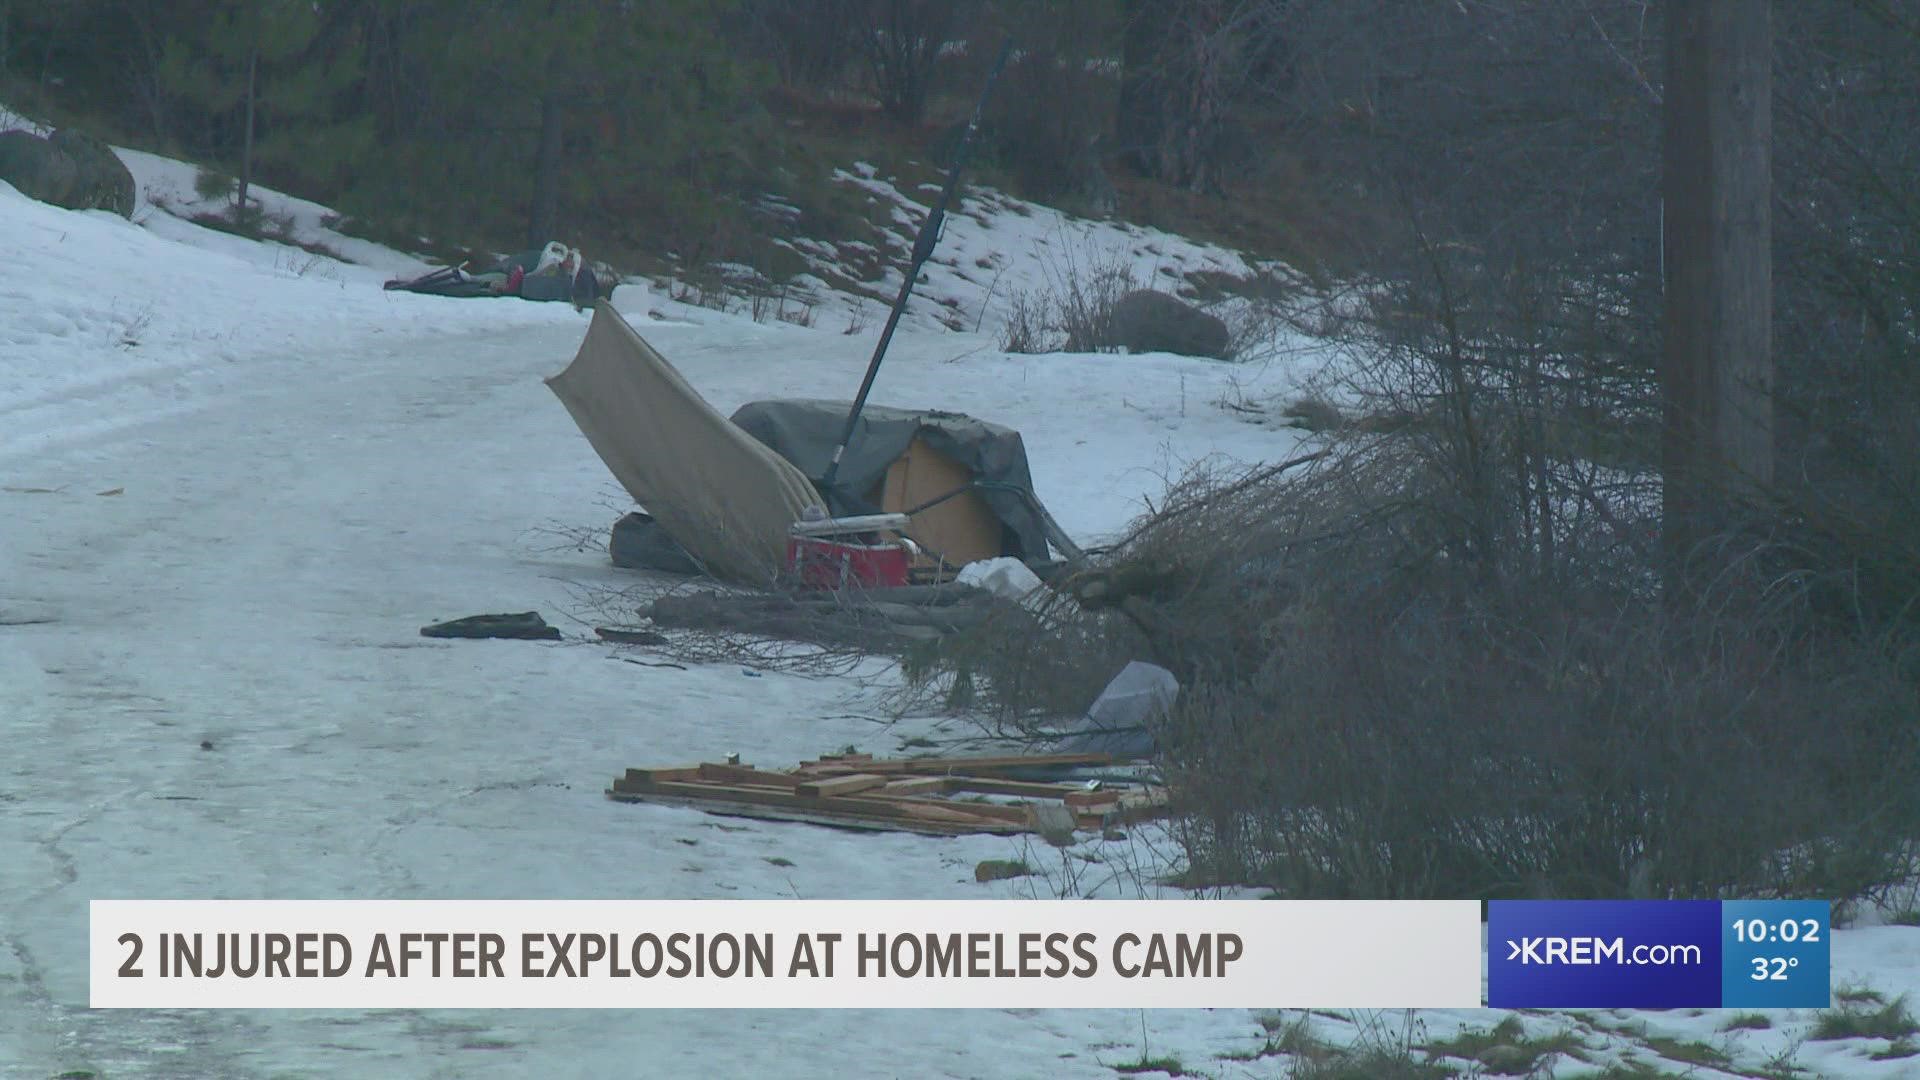 The man and woman were using a camping stove inside their tent before the explosion.